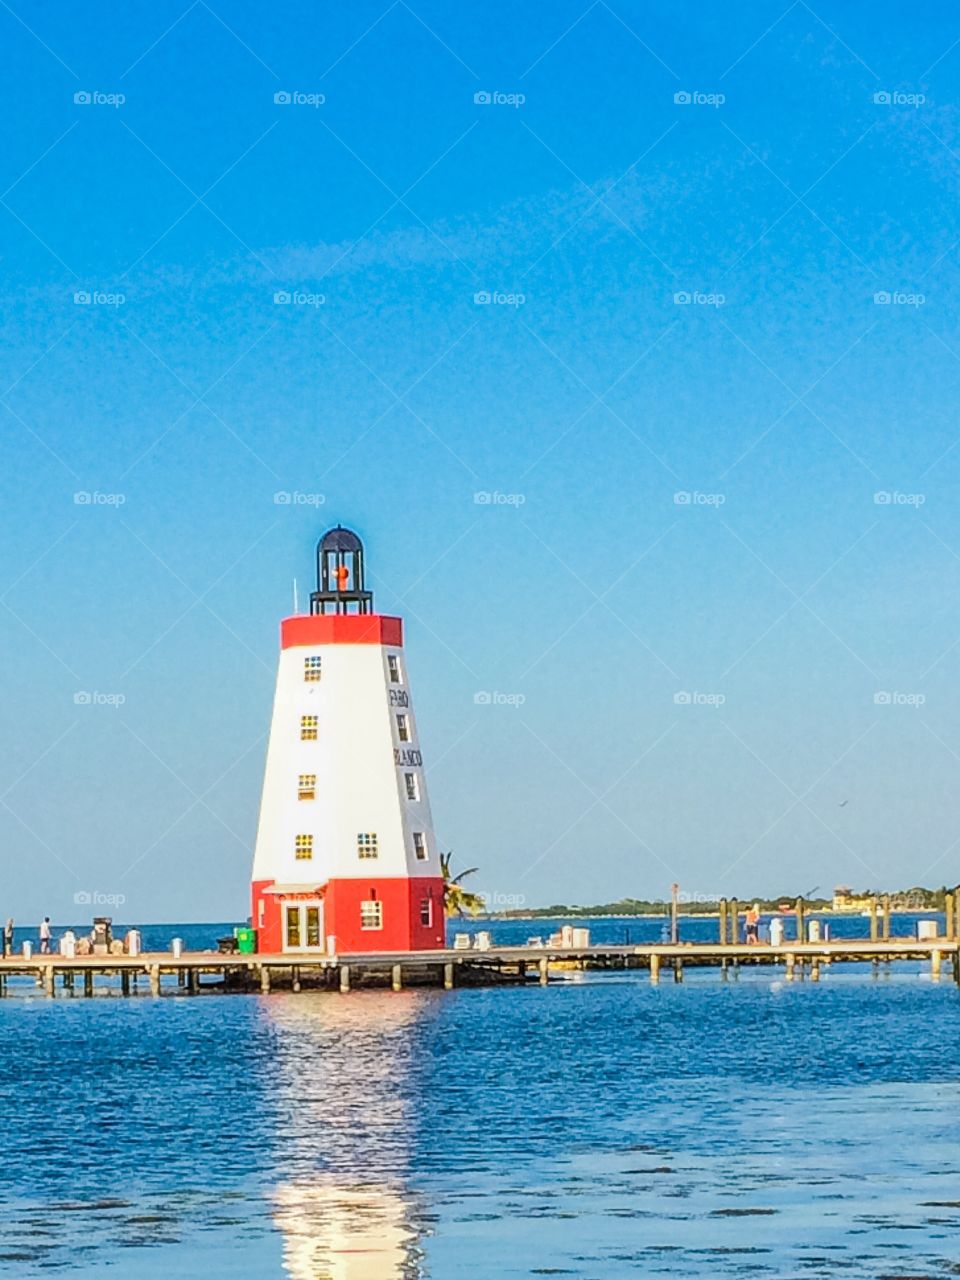 Florida Lighthouse. A lighthouse restaurant right in front of a Florida coast guard station